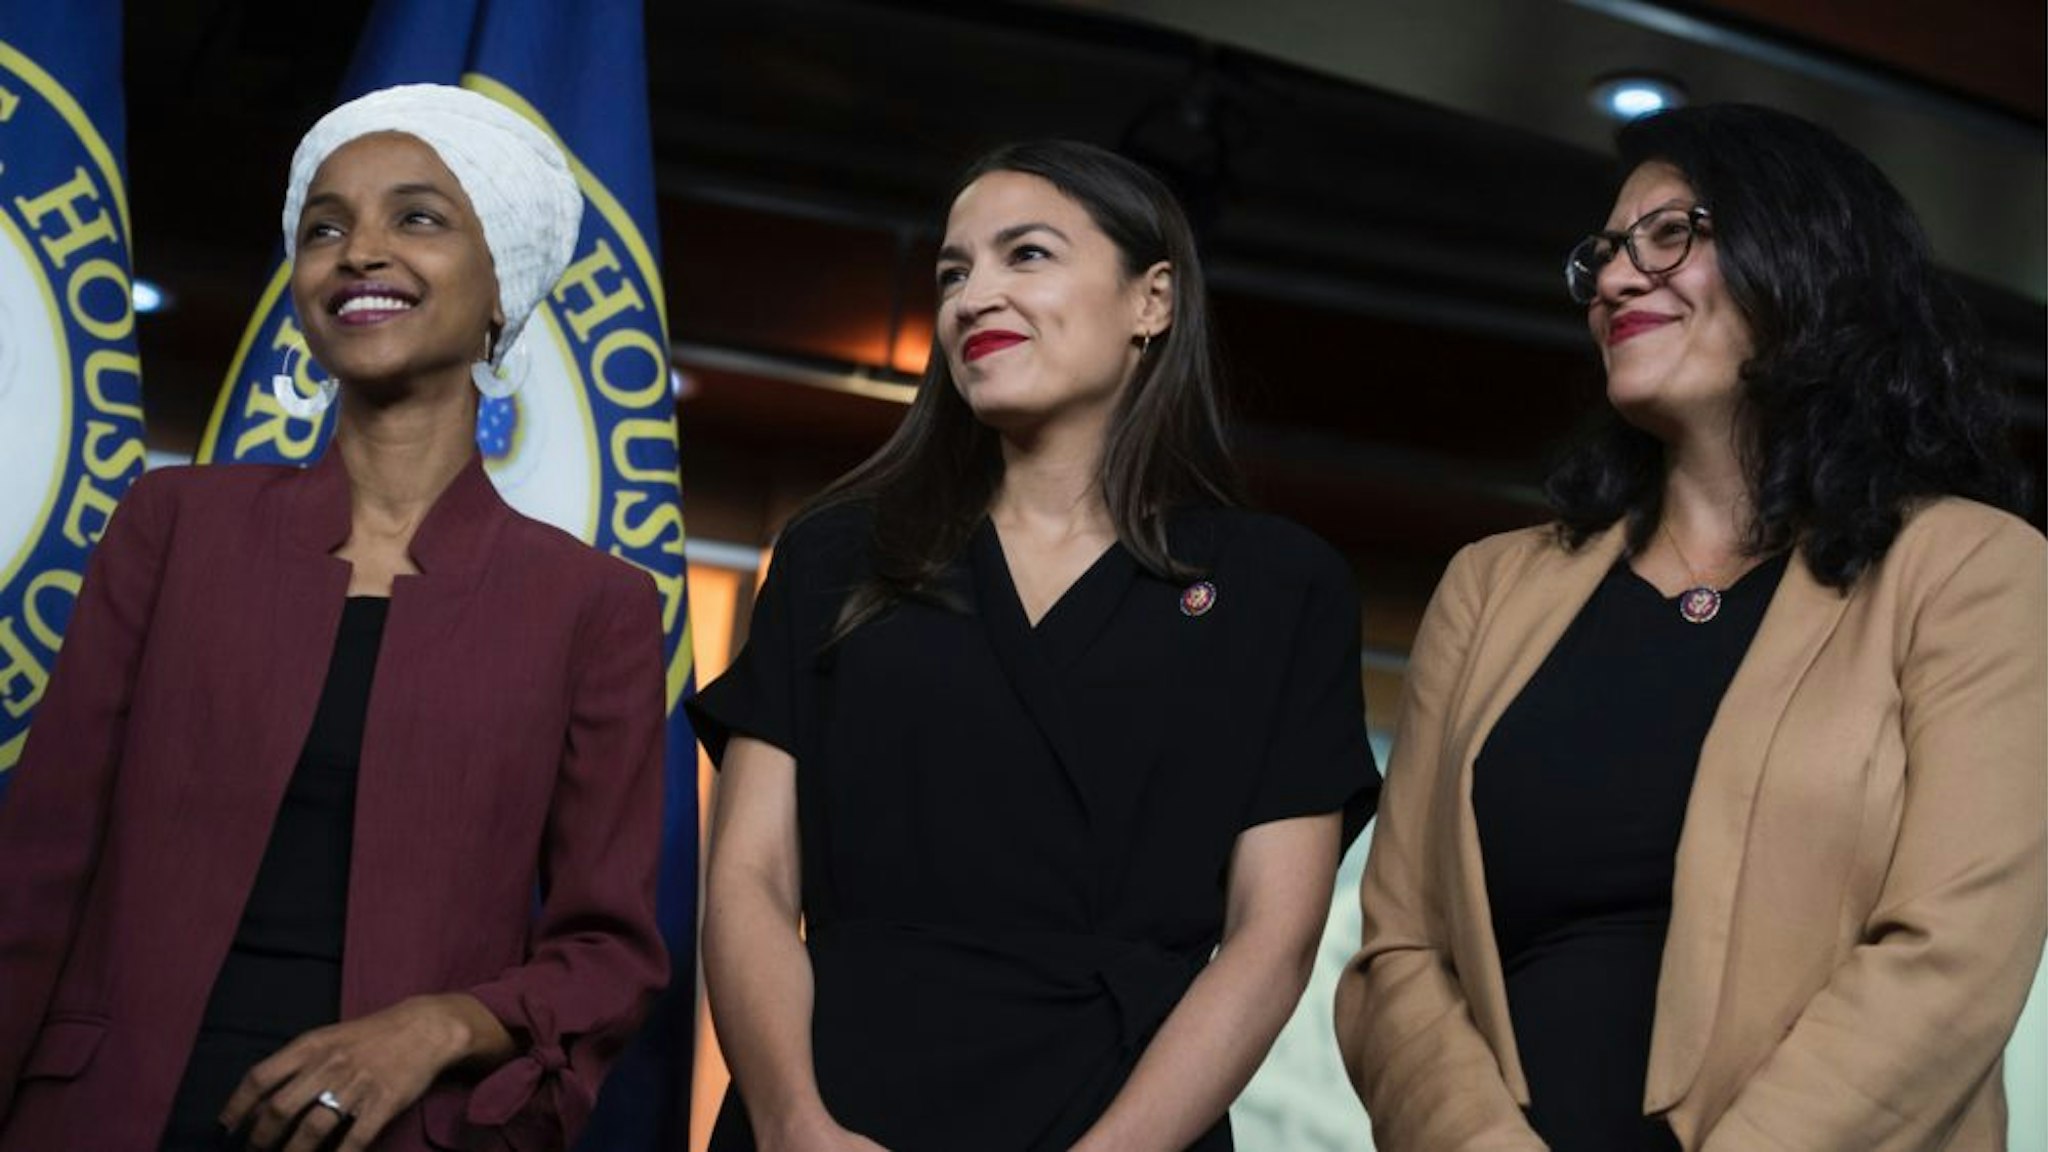 From left, Reps. Ilhan Omar, D-Minn., Alexandria Ocasio-Cortez, D-N.Y., and Rashida Tlaib, D-Mich., conduct a news conference in the Capitol Visitor Center responding to negative comments by President Trump that were directed at the freshmen House Democrats on Monday, July 15, 2019.